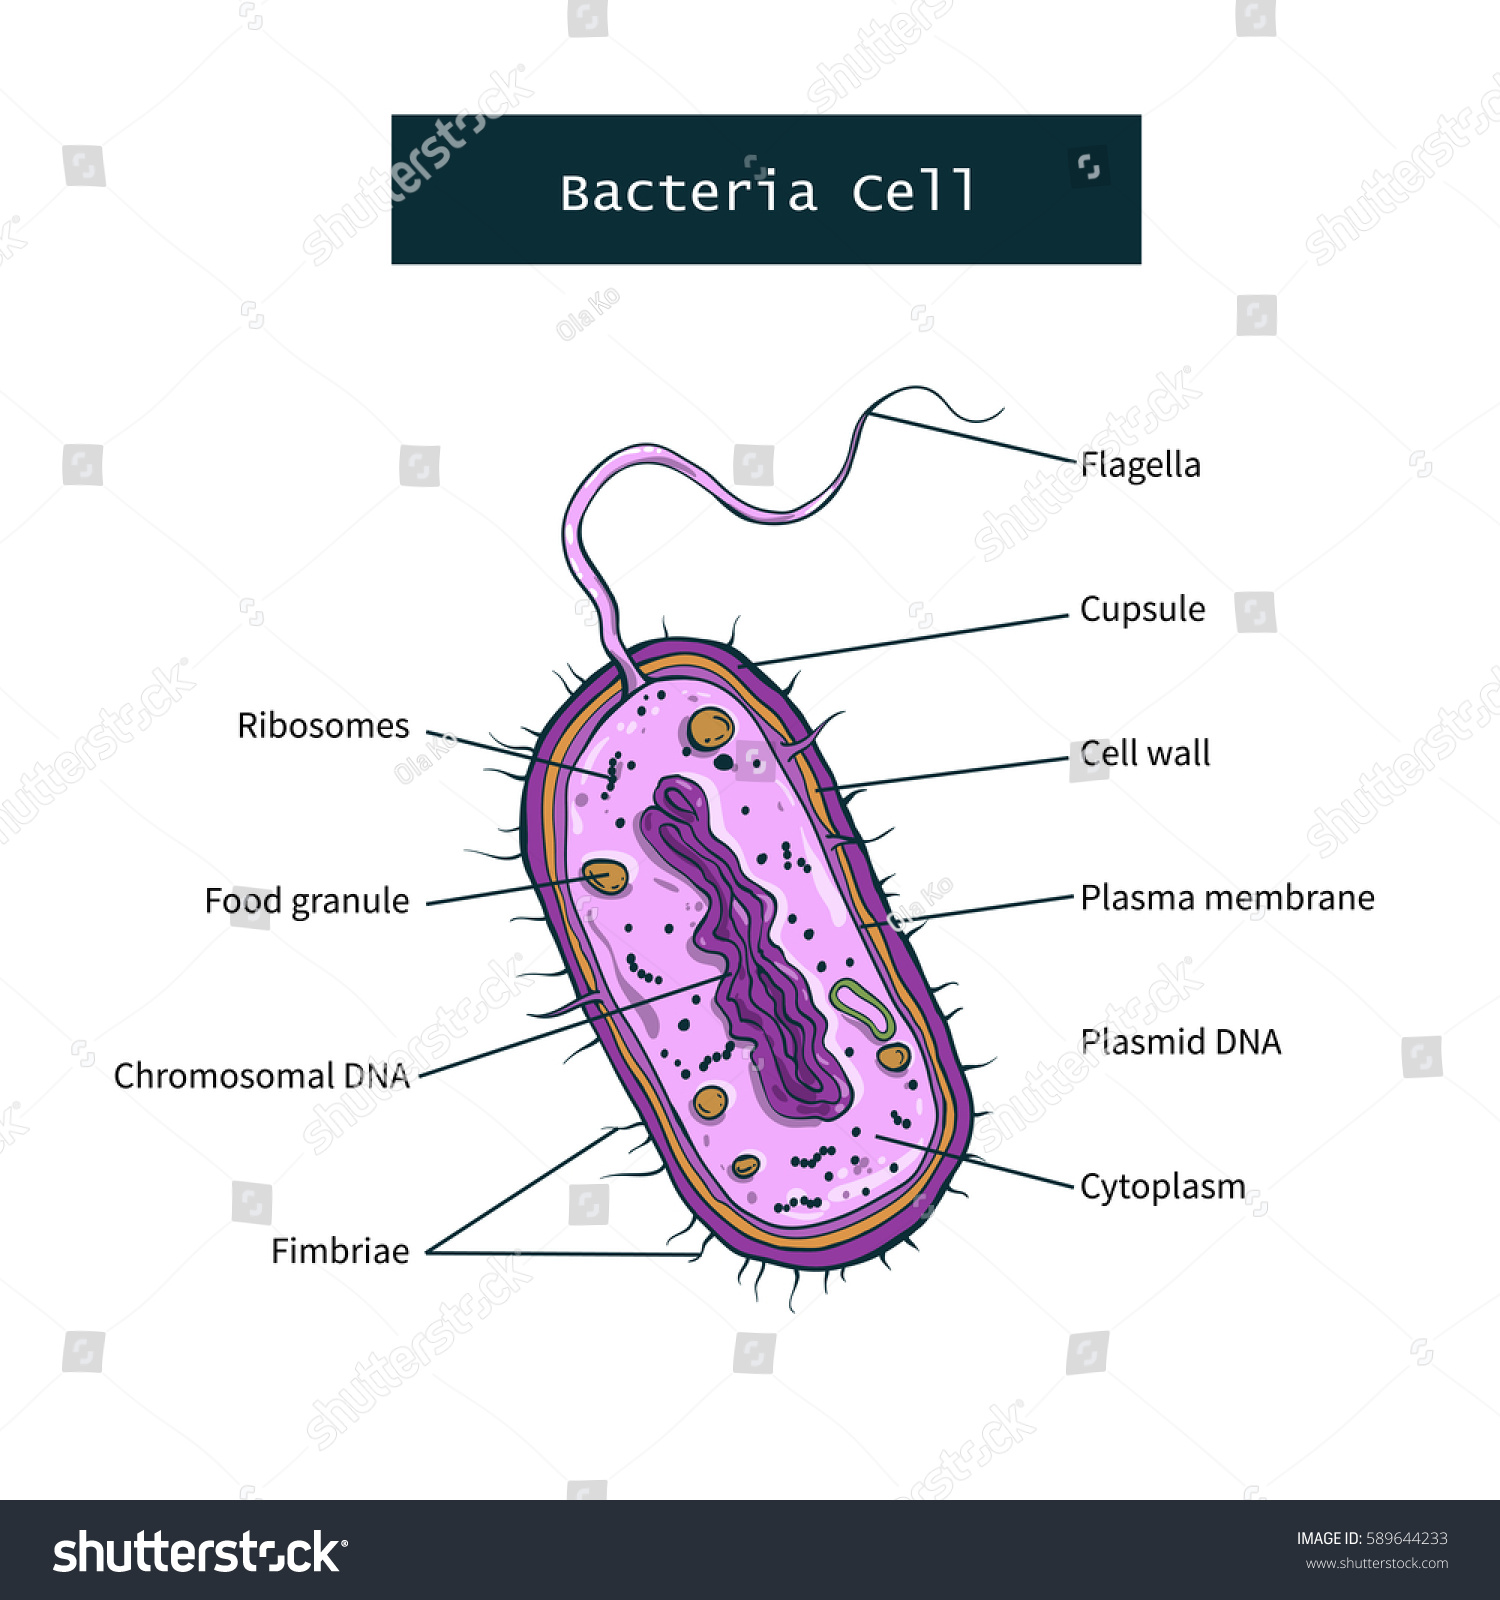 Structure Bacteria Cell On White Background Stock Vector 589644233 ...